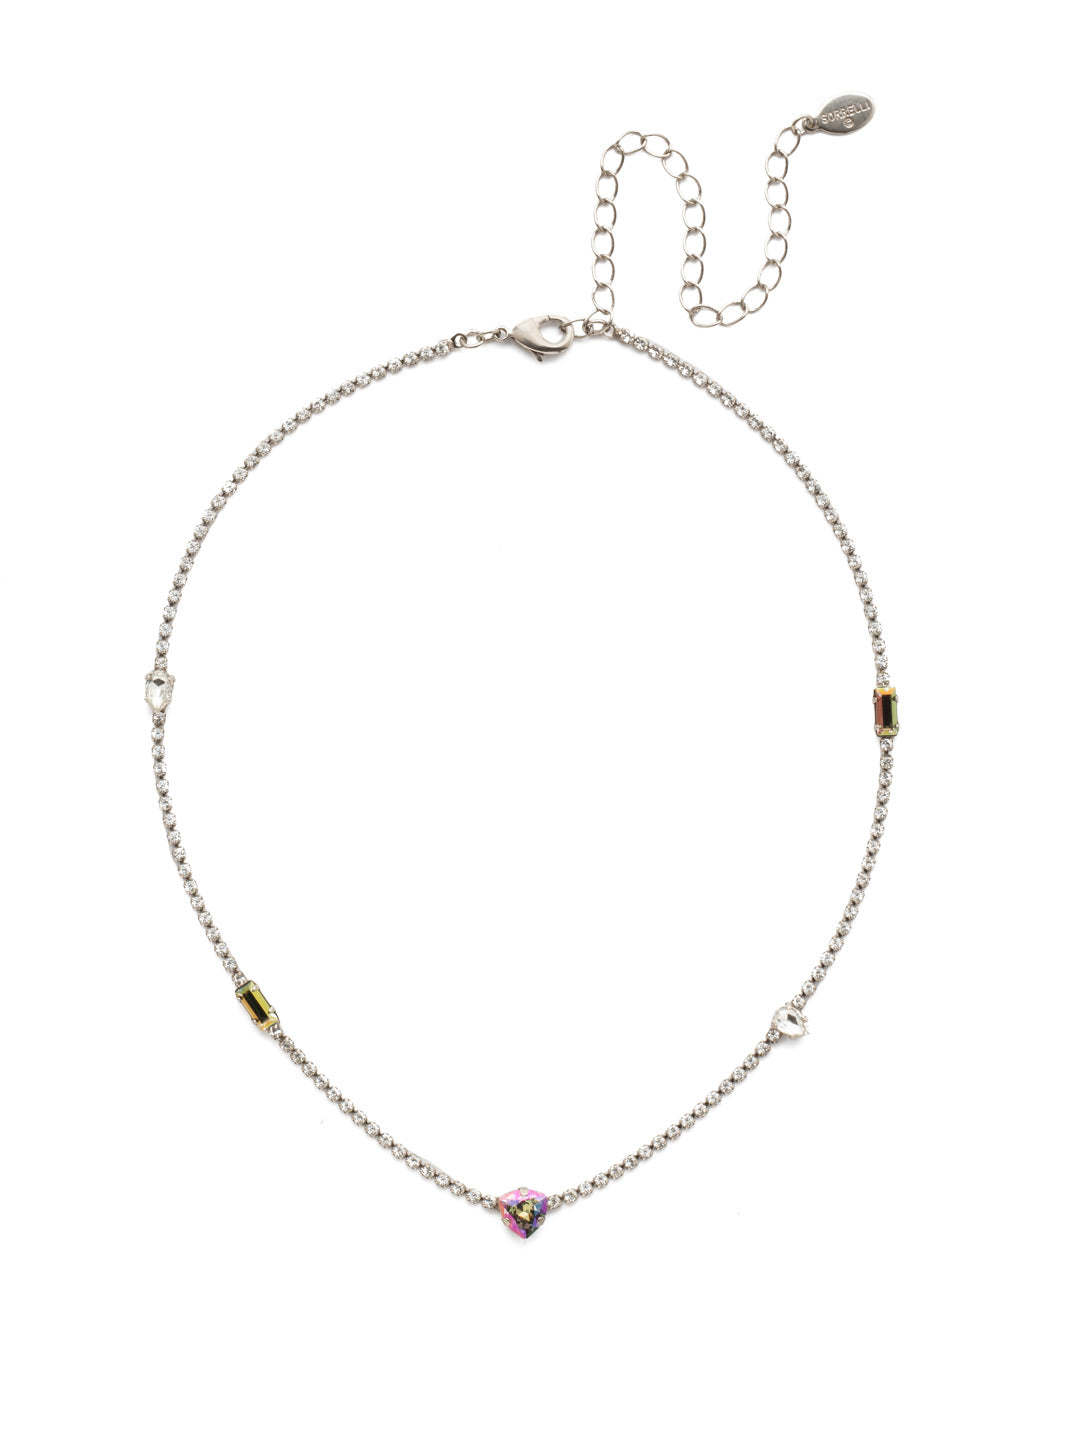 Ophelia Tennis Necklace - NEP9ASCRE